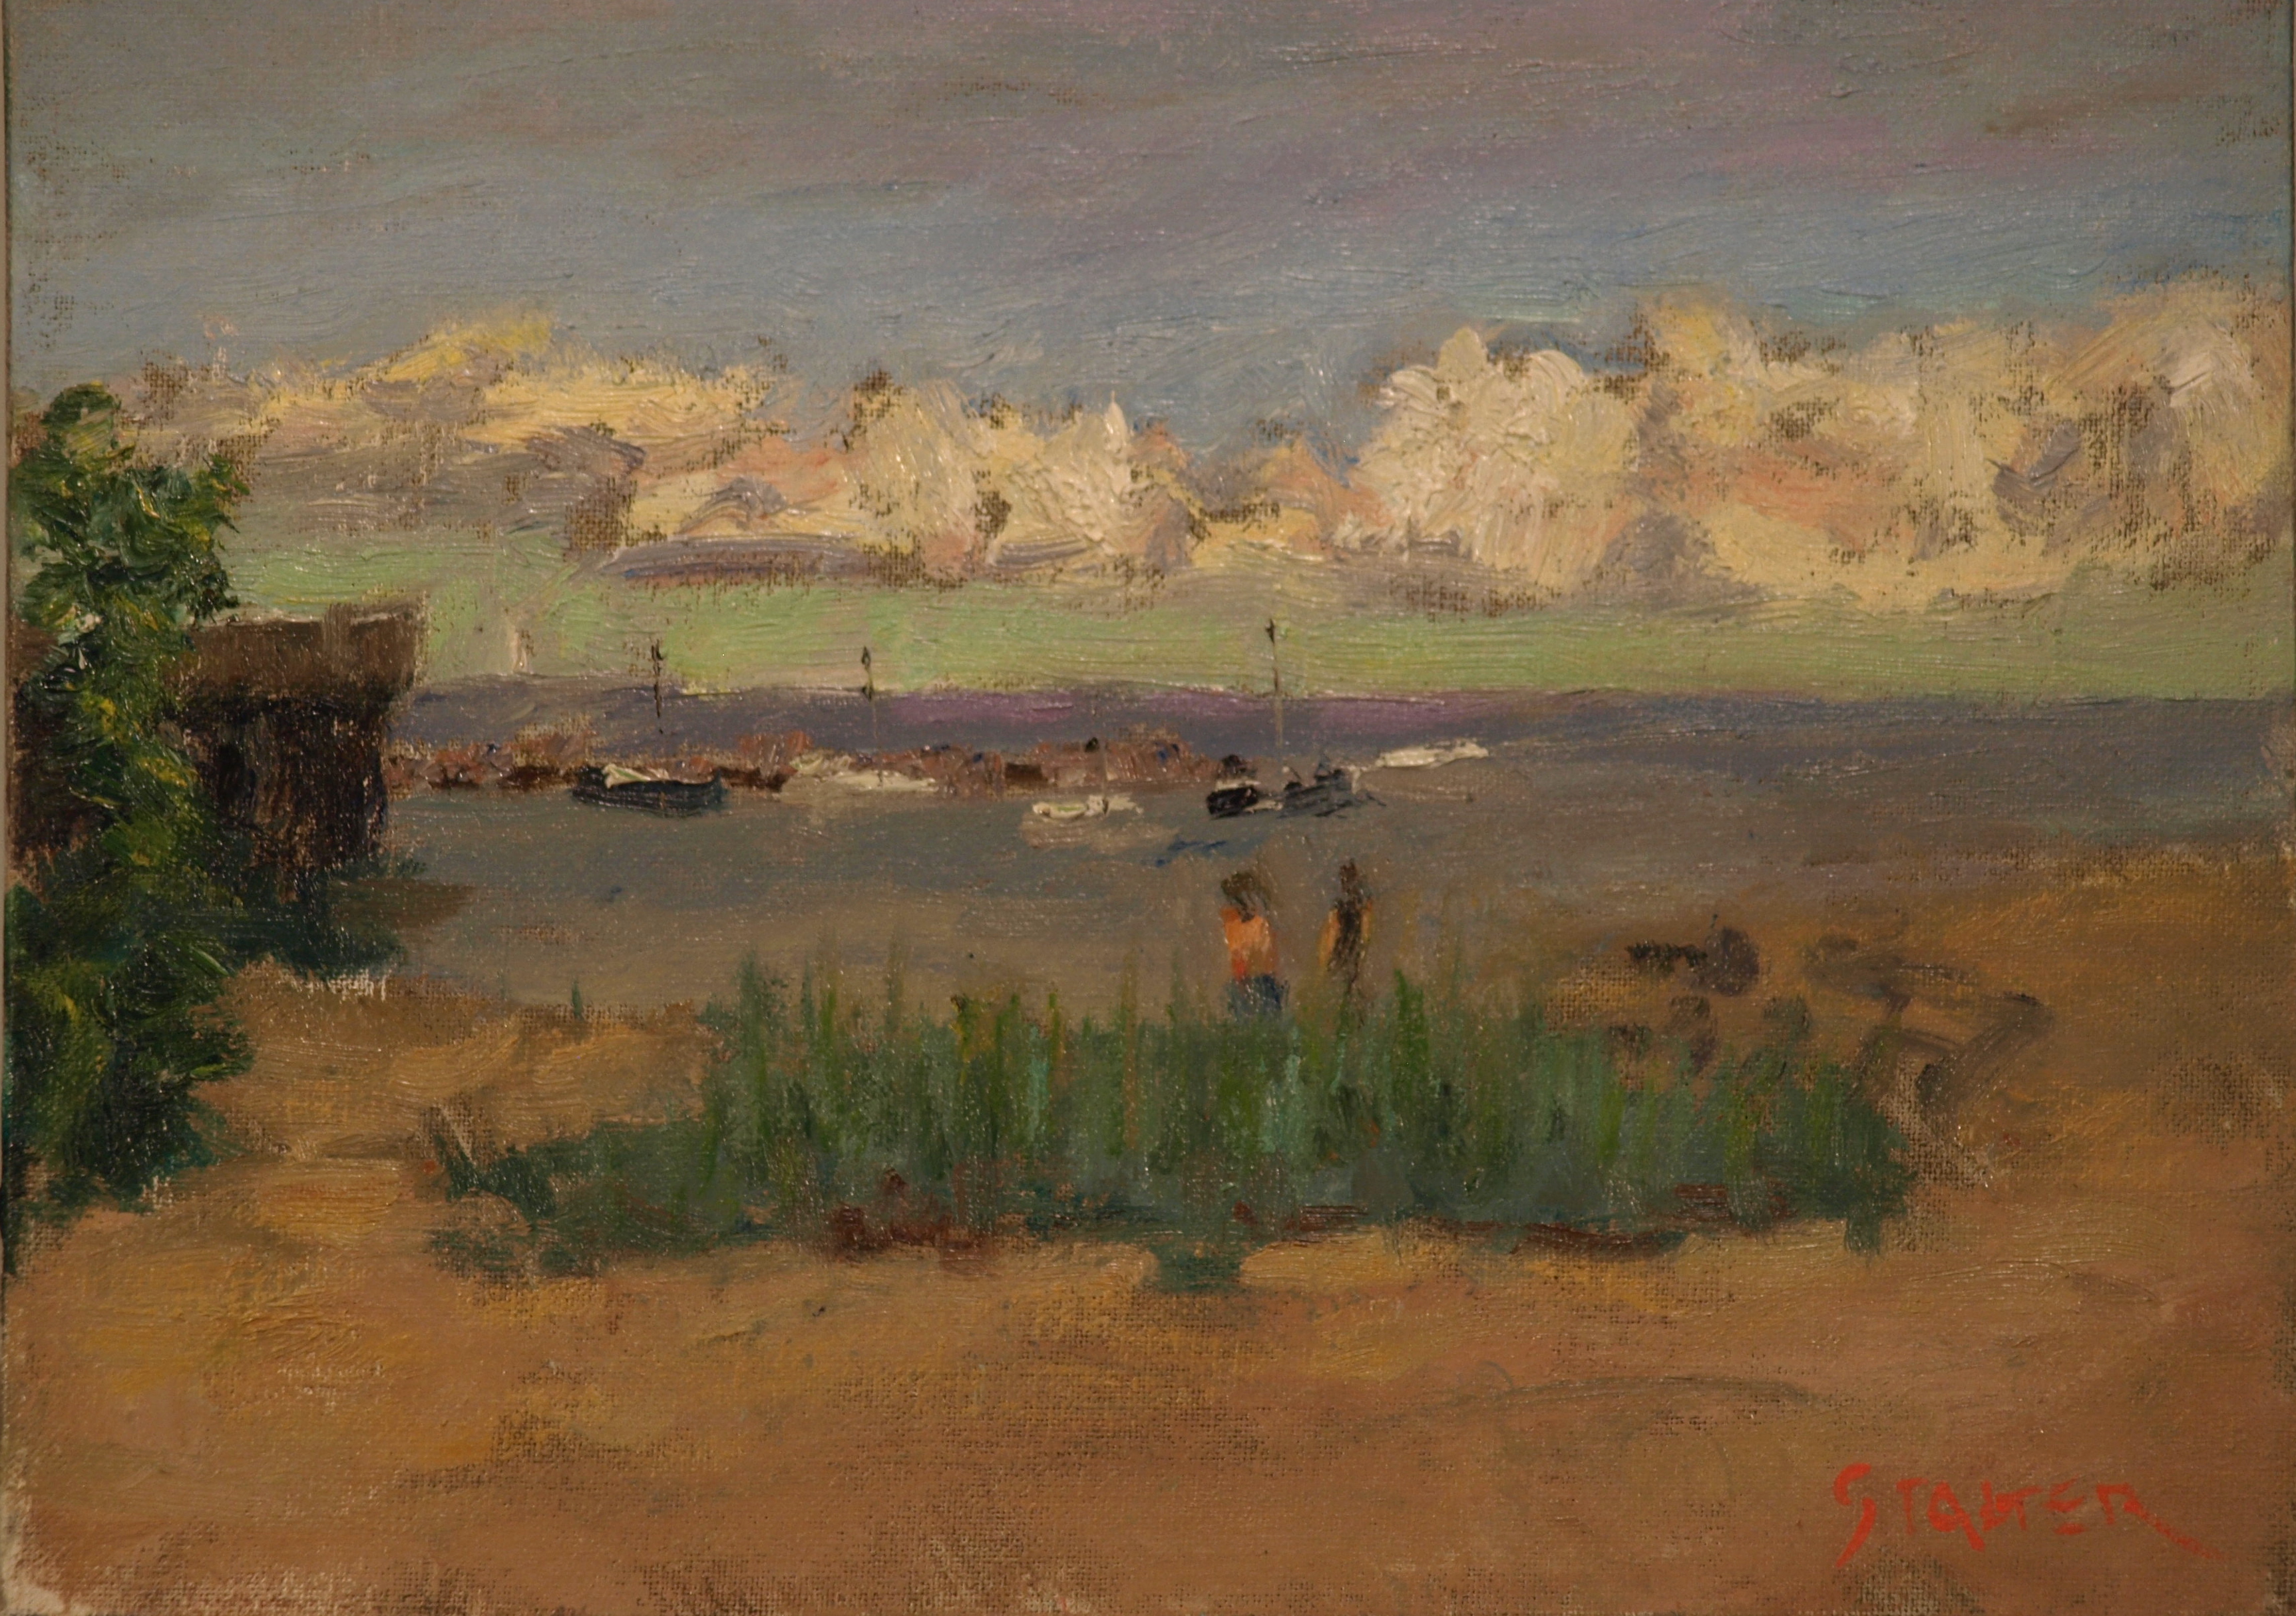 Boats off Provincetown Beach, Oil on Canvas on Panel, 9 x 12 inches, by Richard Stalter, $225